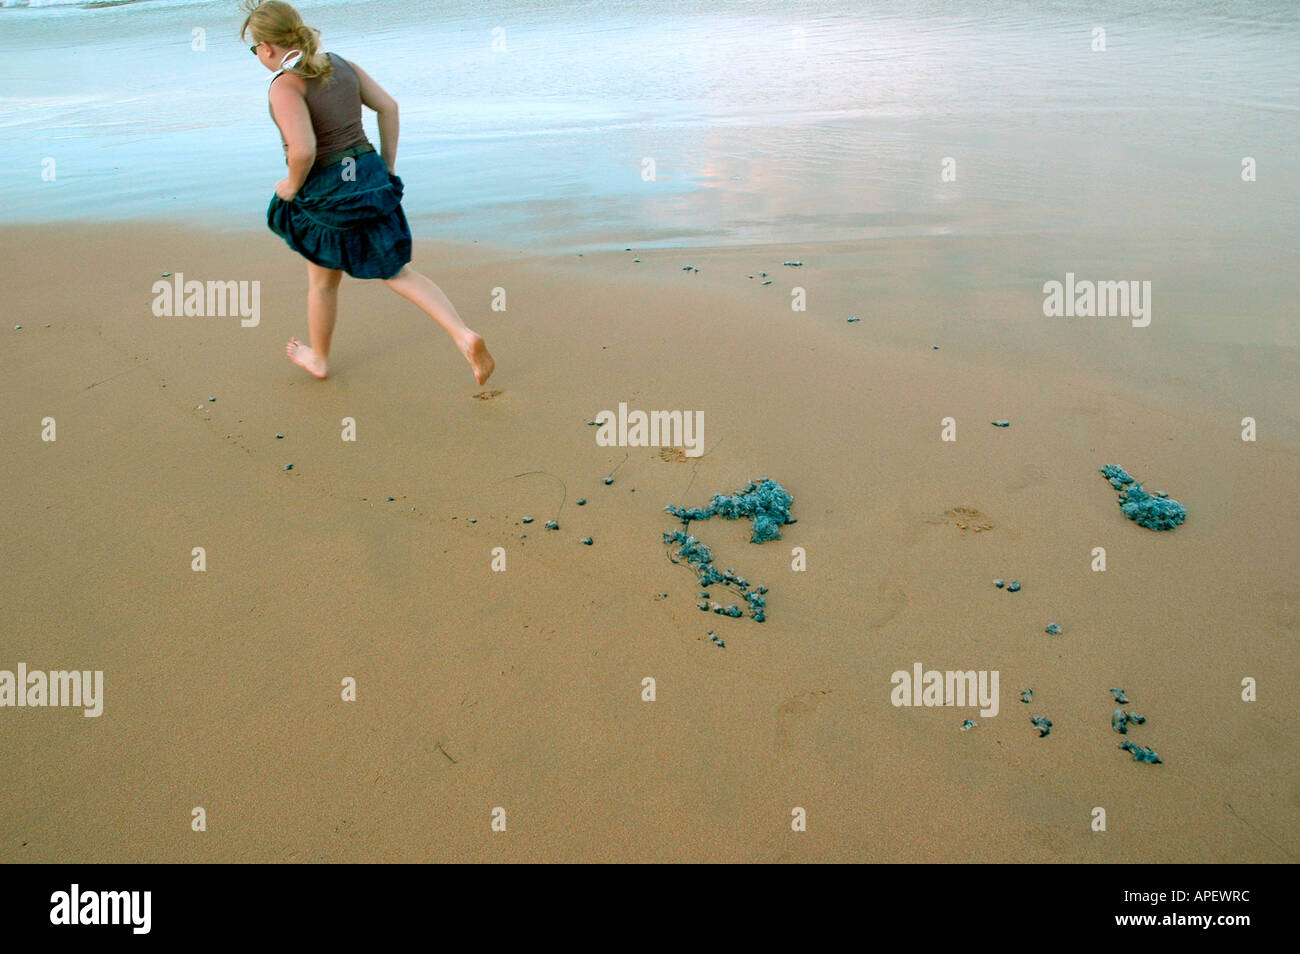 A young girl running on a beach, trying to avoid pack of bluebottle jellyfish, Sydney, Australia. Stock Photo